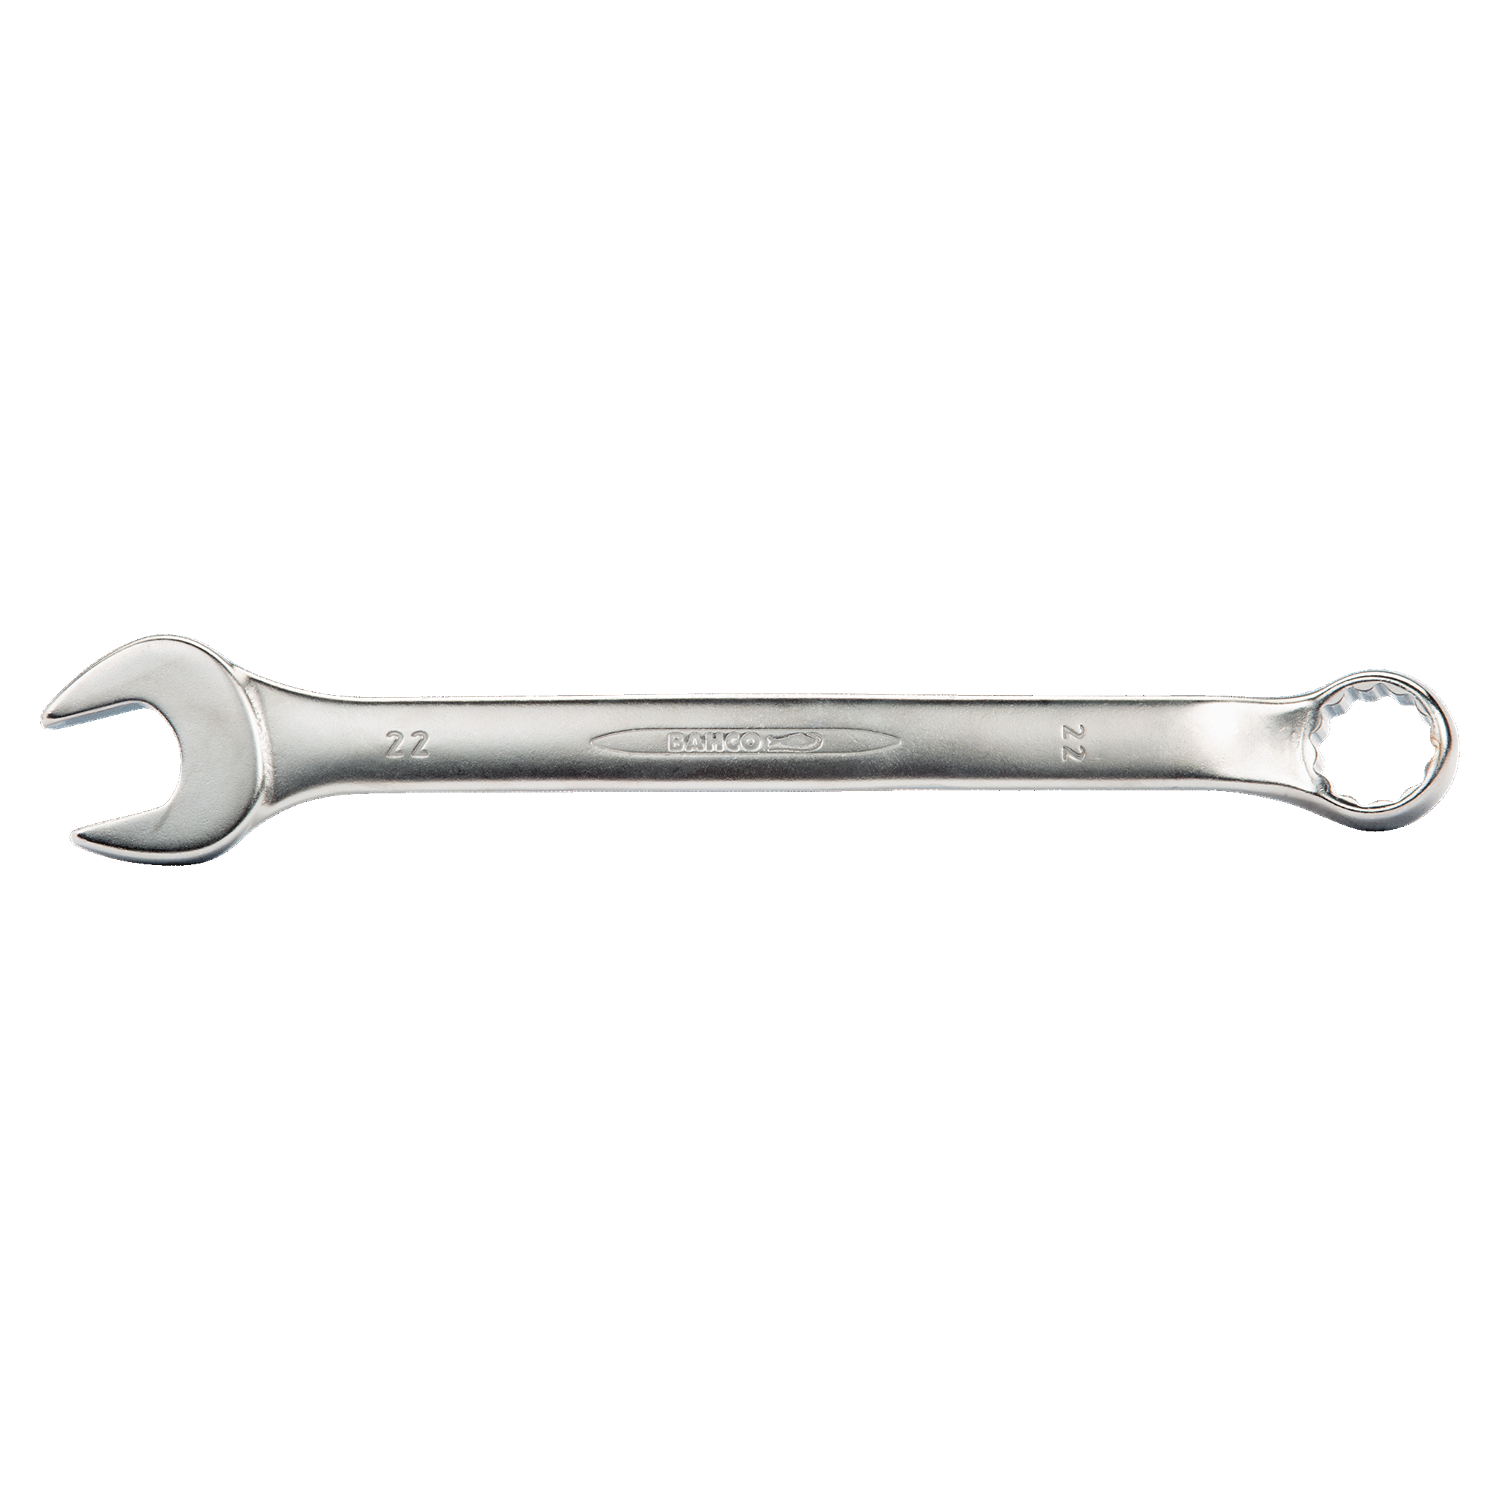 BAHCO 1952M Metric Offset Combination Wrench with Chrome Finish - Premium Combination Wrench from BAHCO - Shop now at Yew Aik.